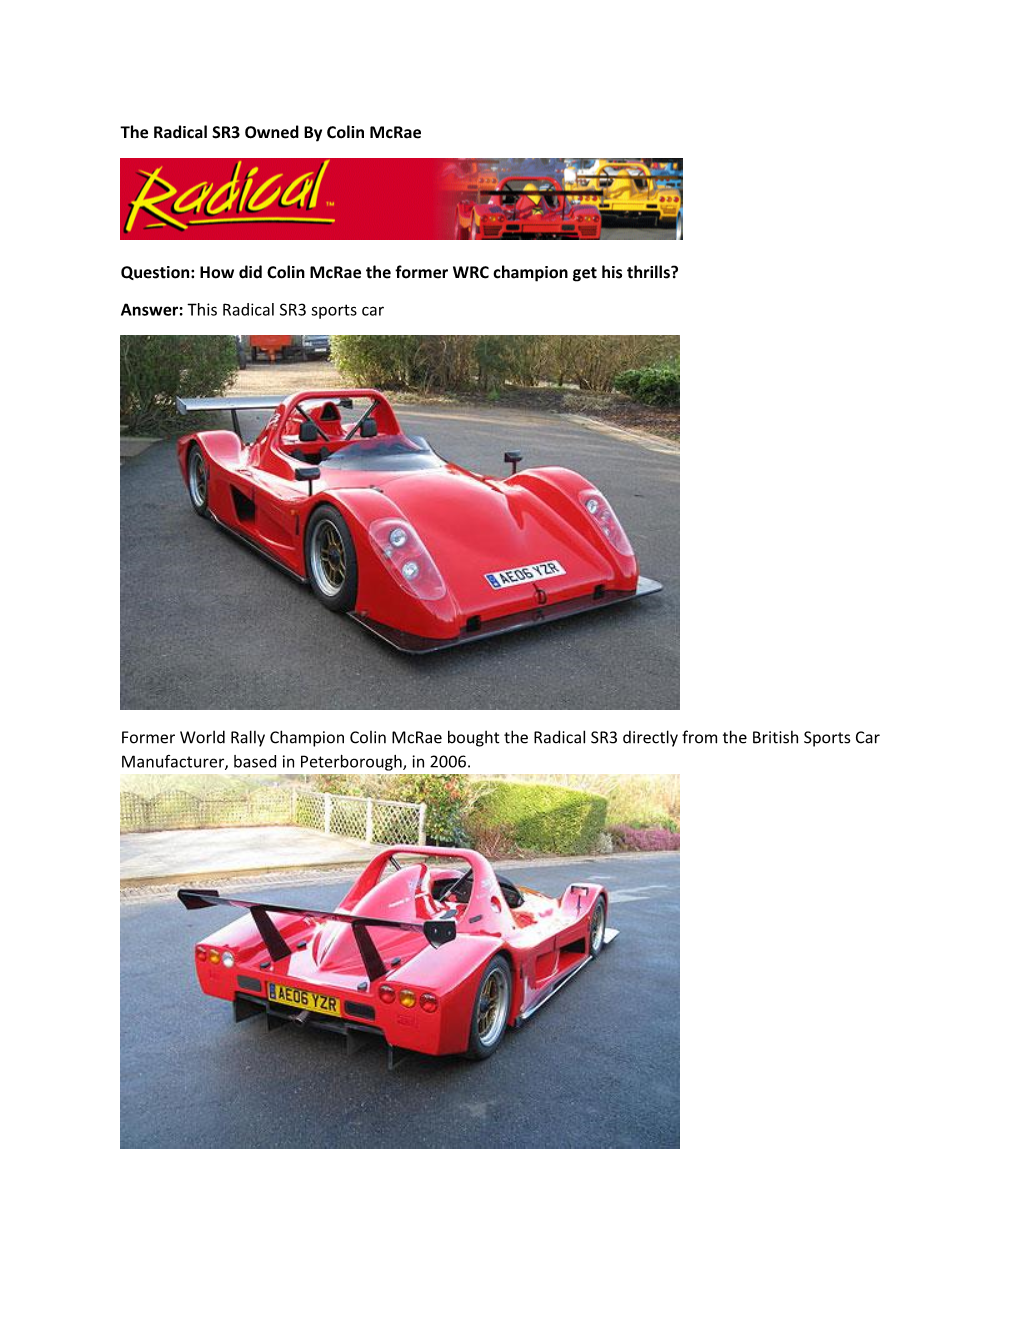 The Radical SR3 Owned by Colin Mcrae